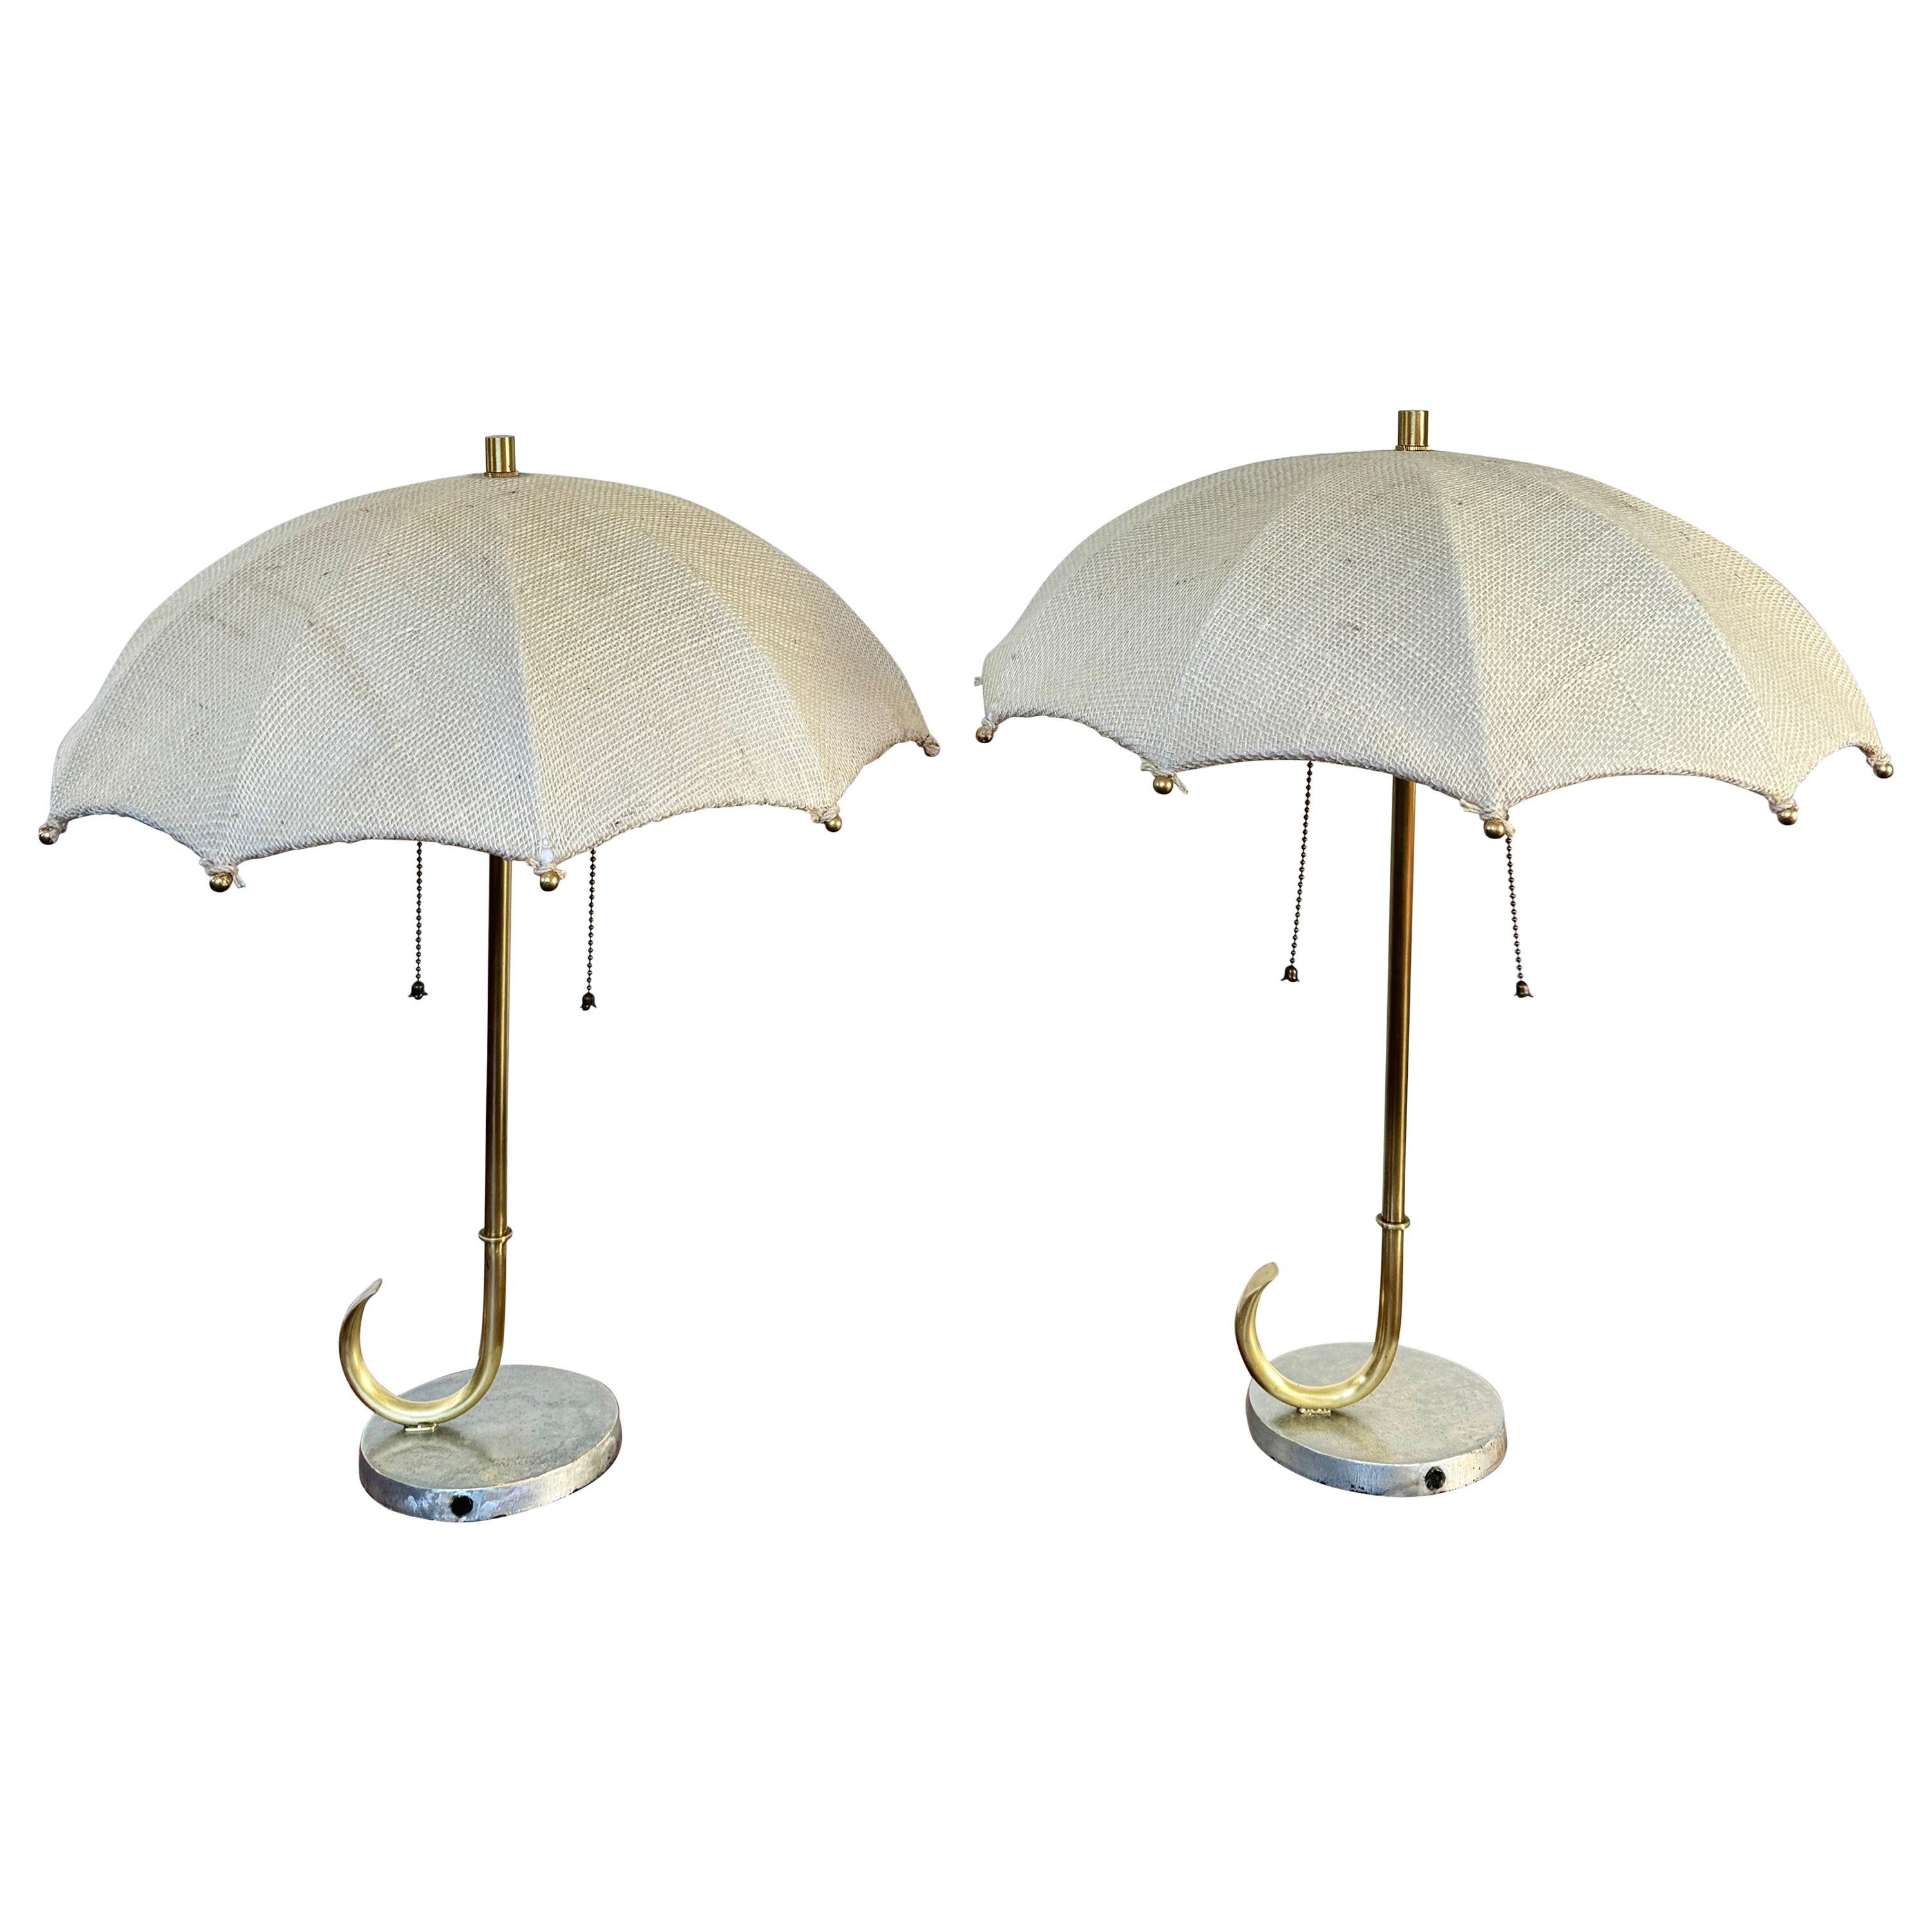 Pair of umbrella table lamps by Gilbert Rohde for Mutual Sunset lamp co 1930s For Sale